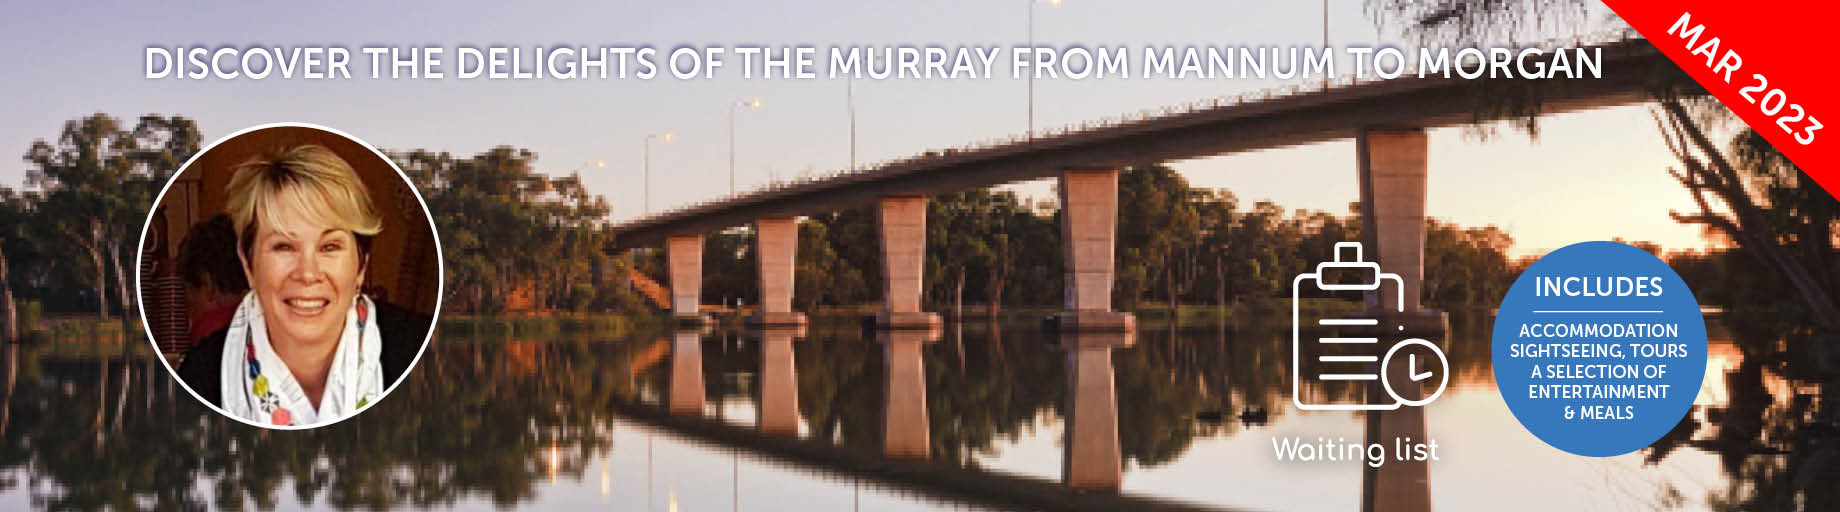 Murray River Quilting Cruise